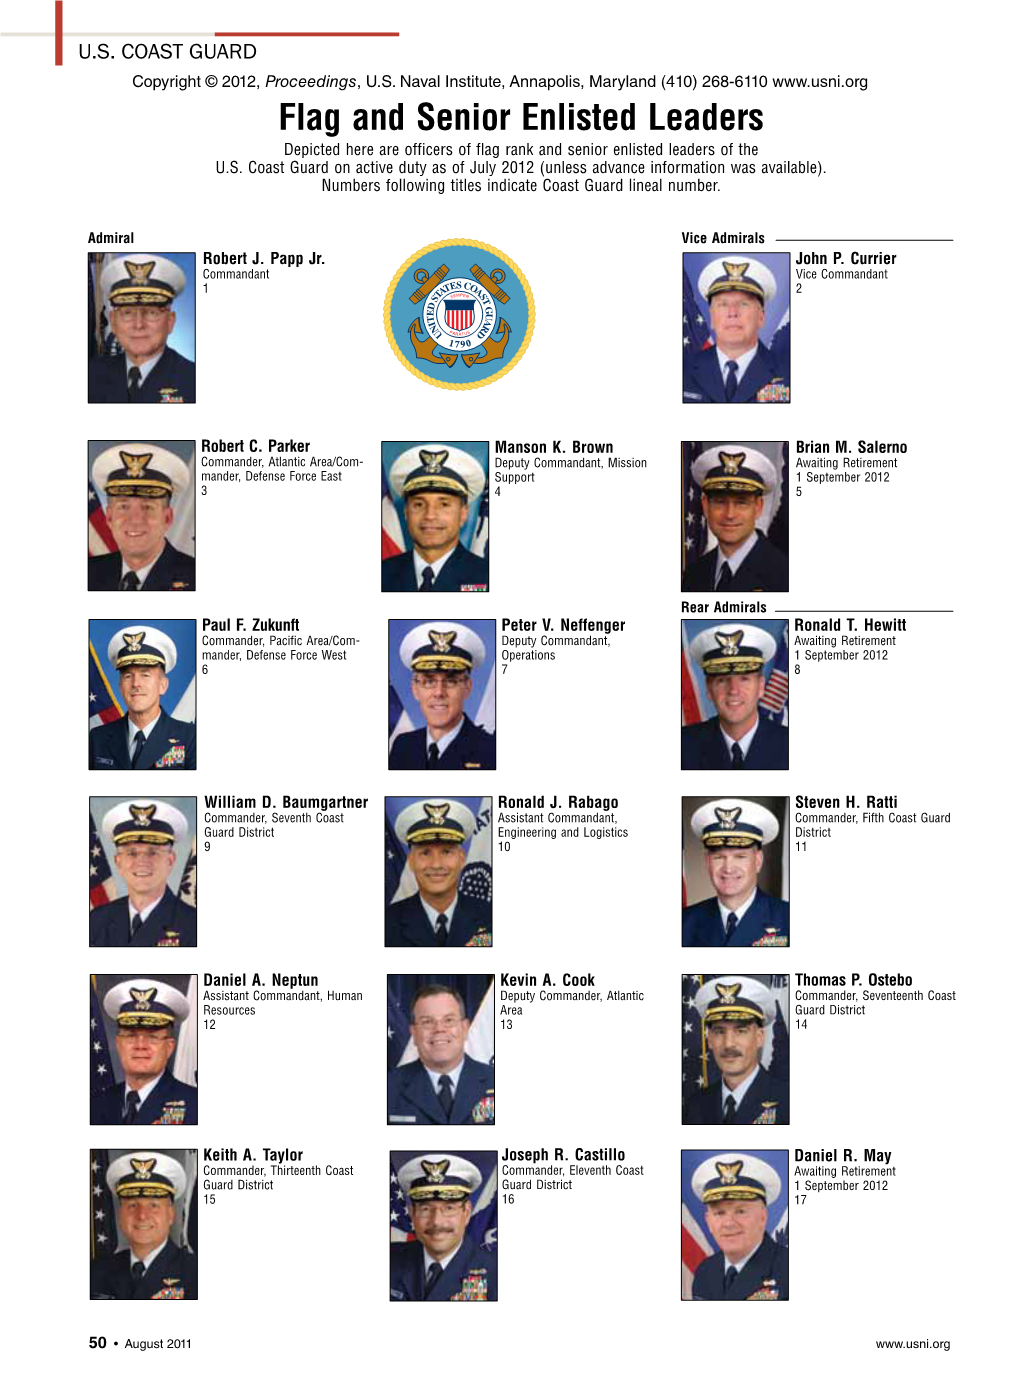 Flag and Senior Enlisted Leaders Depicted Here Are Officers of Flag Rank and Senior Enlisted Leaders of the U.S